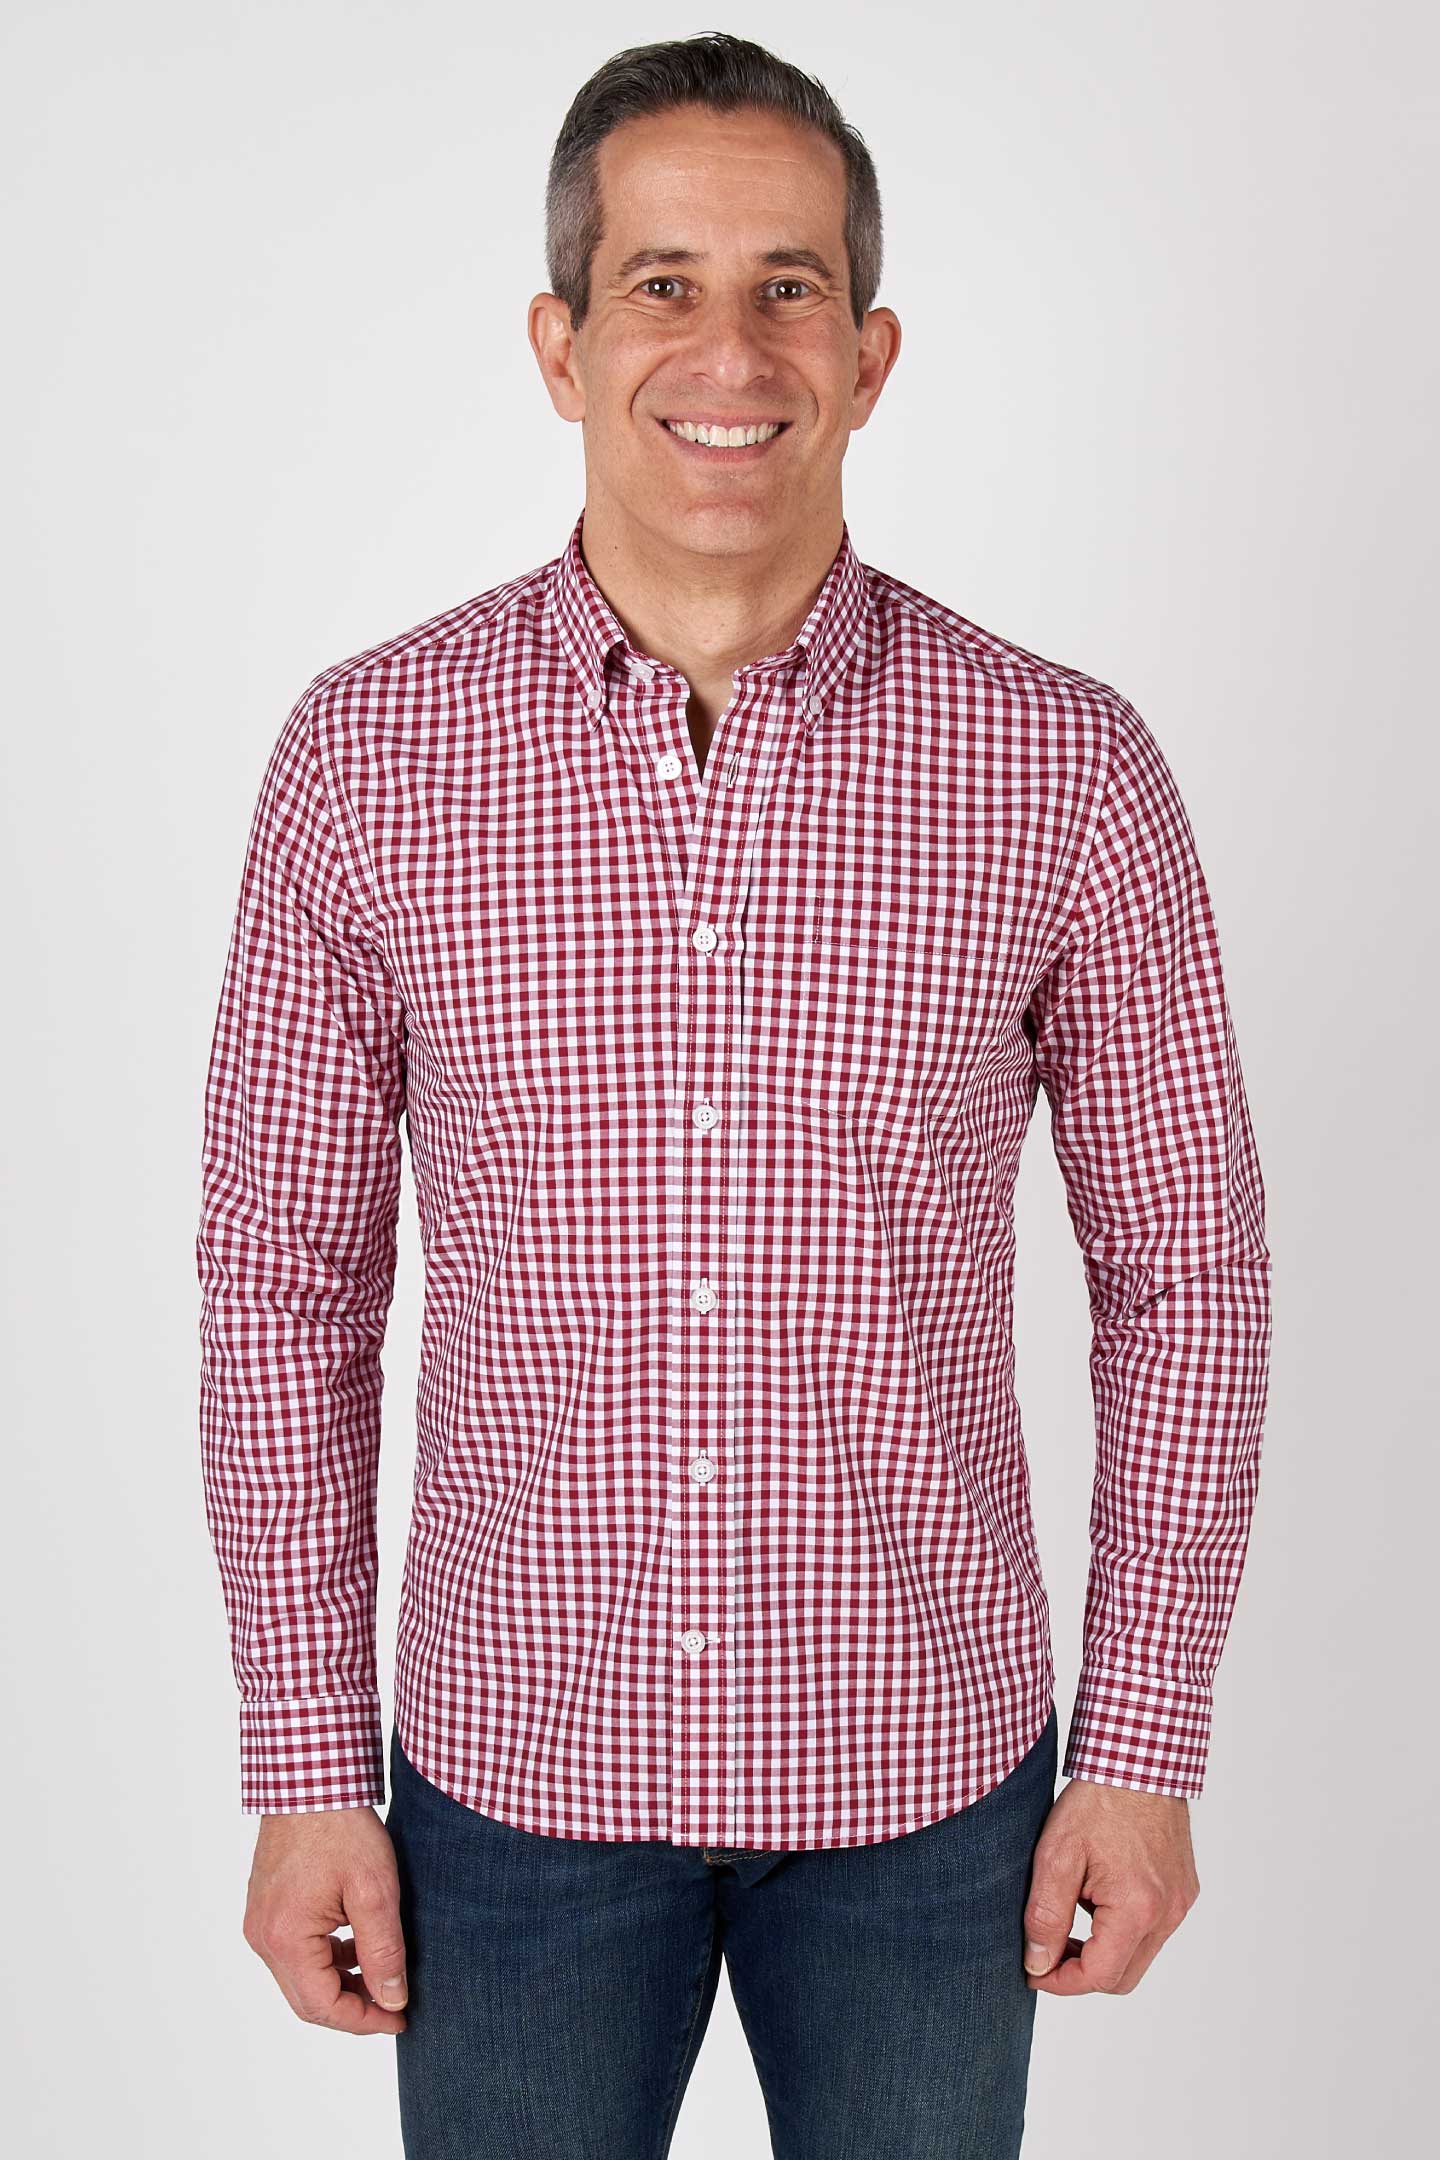 Buy Red Gingham Button-Down Shirt for Short Men | Ash & Erie   Everyday Shirts